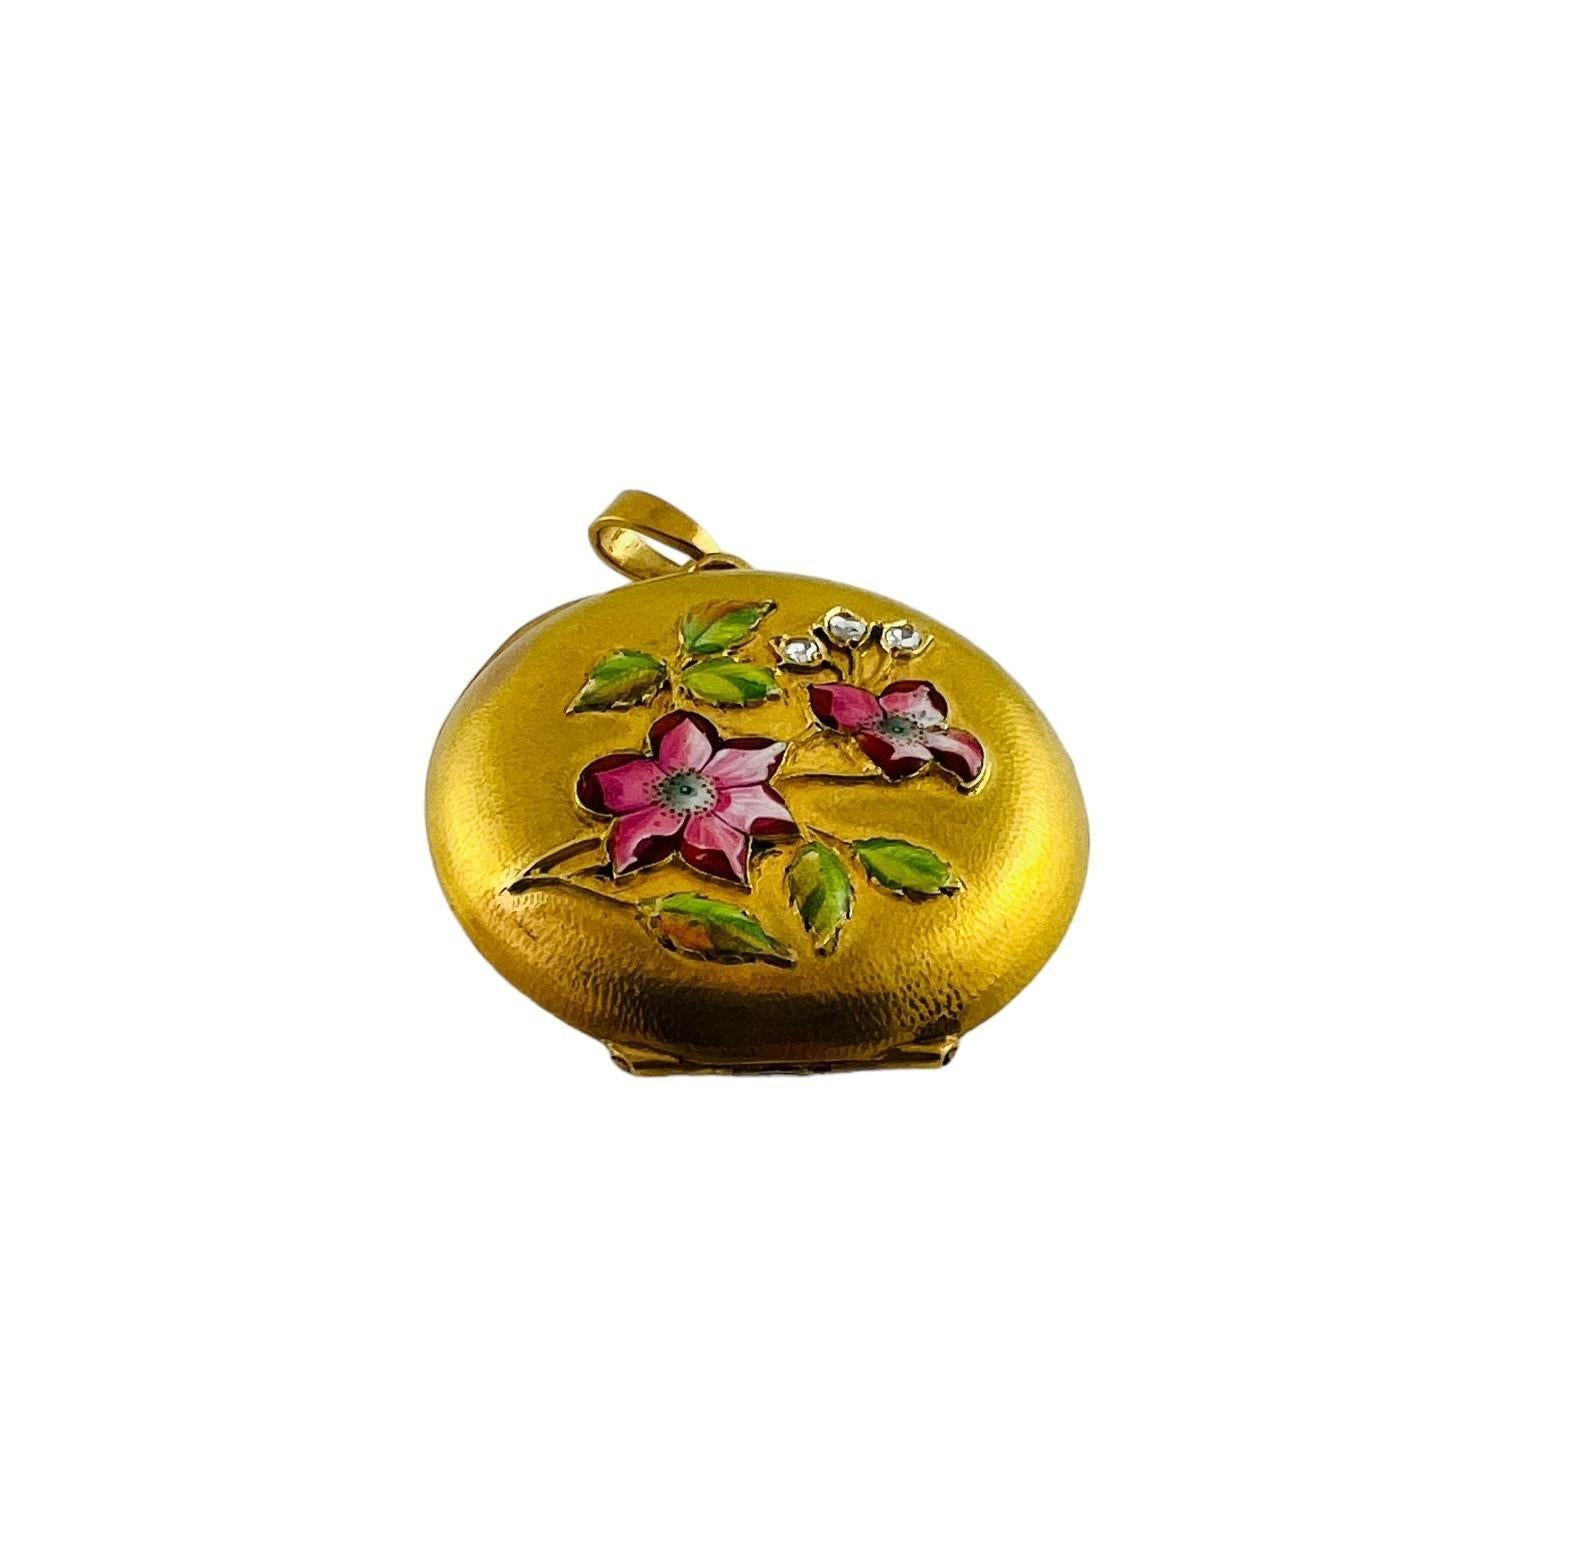 18K Yellow Gold and Enamel Round Locket with Floral Design #16549 For Sale 1